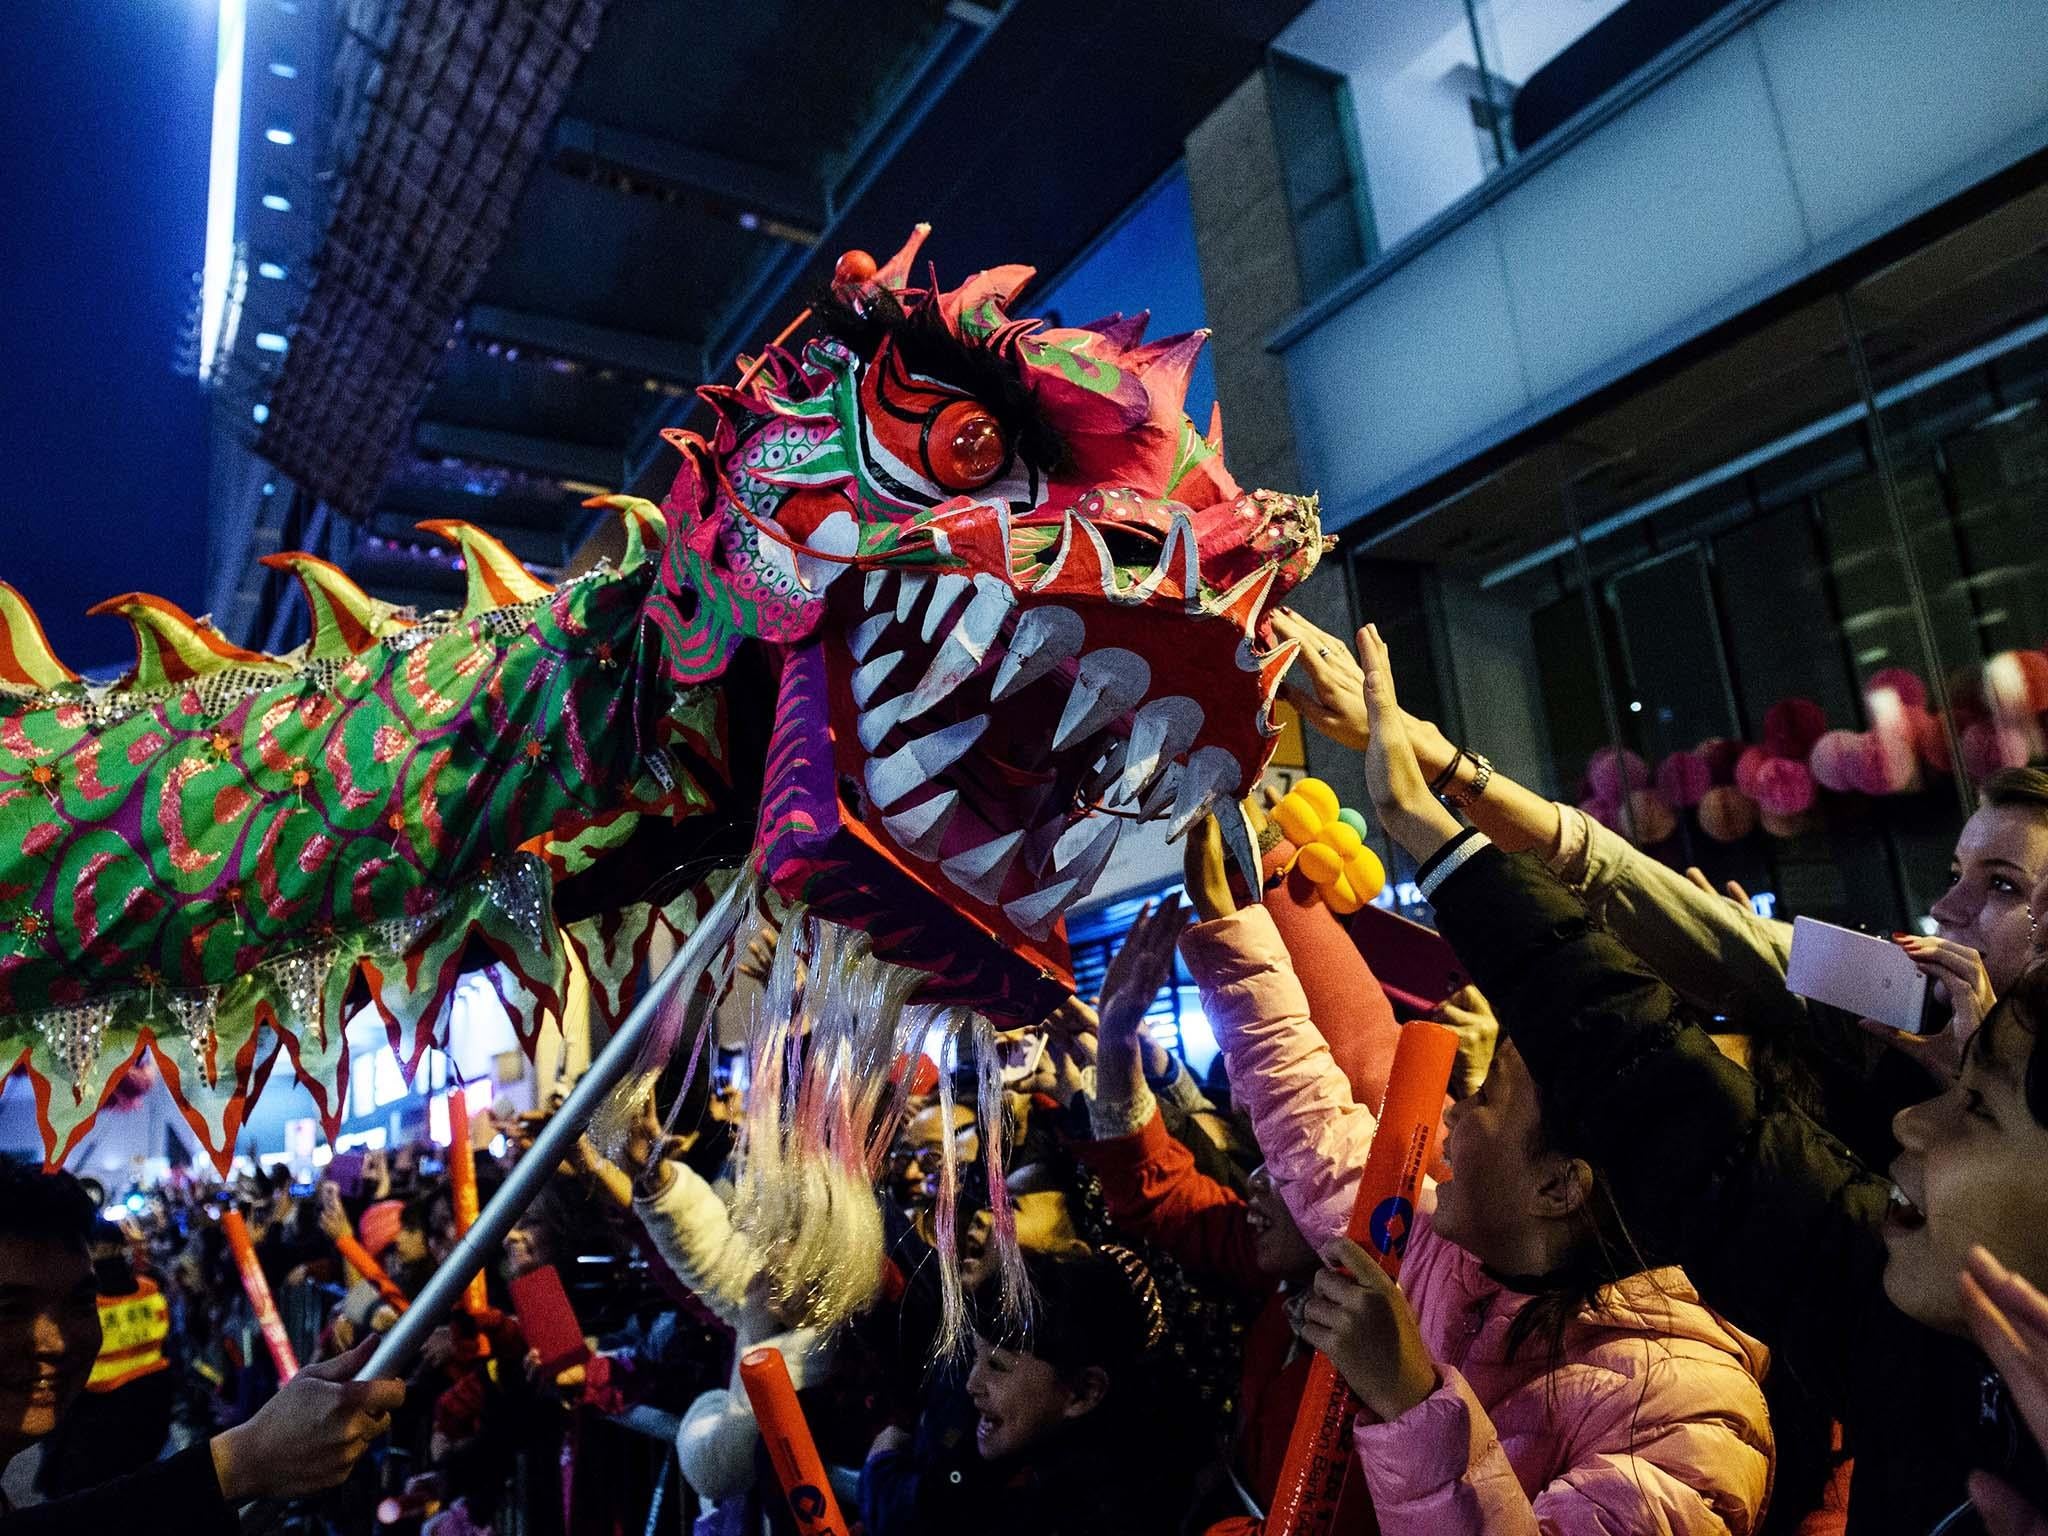 Crowds celebrate Chinese New Year, beginning the year of the fire rooster